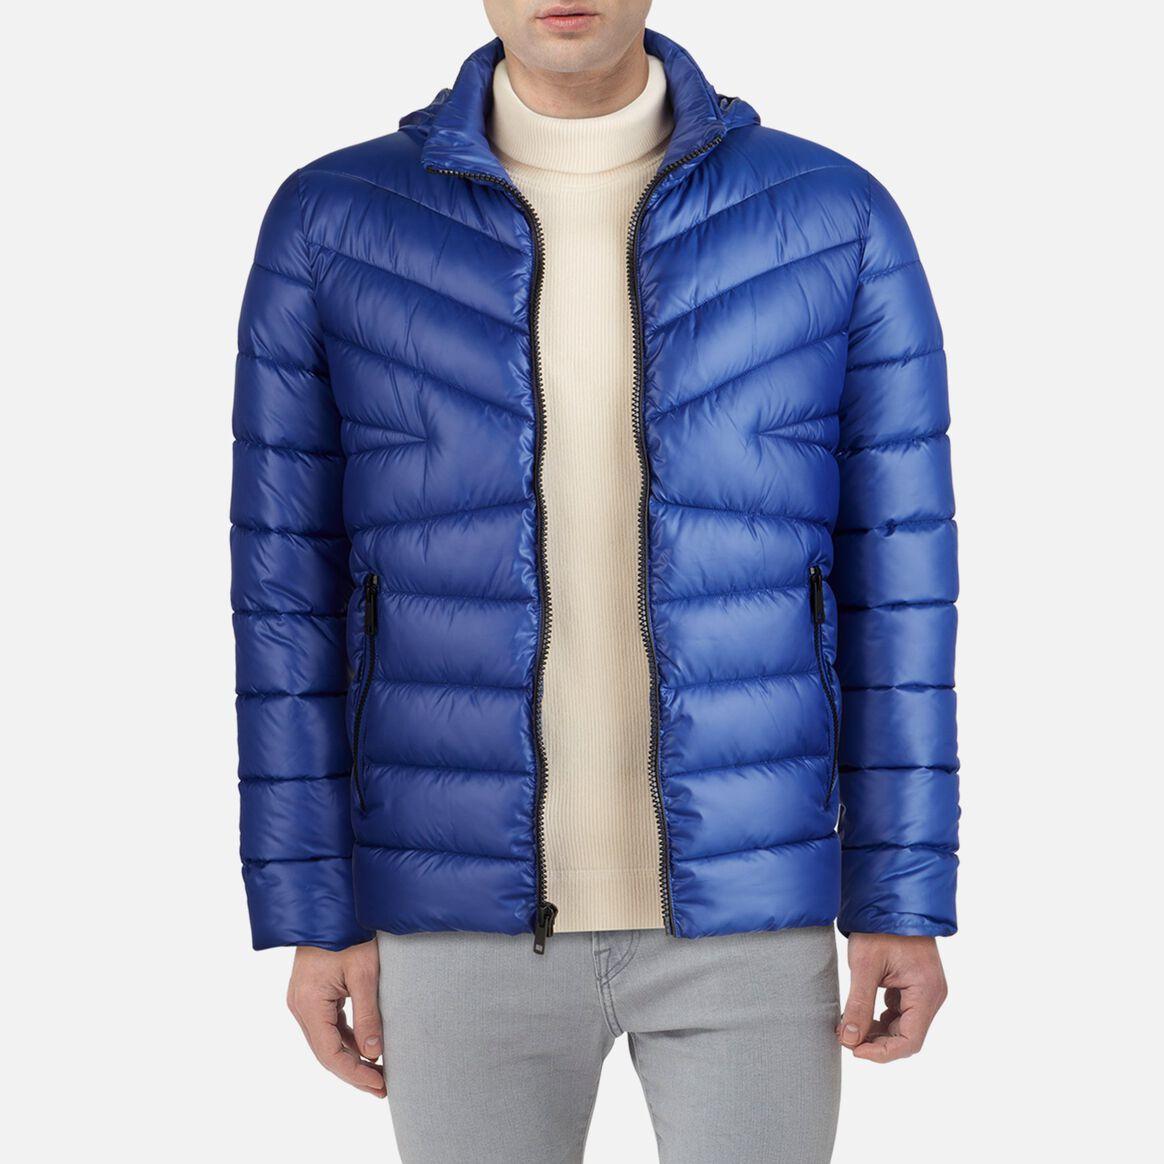 Kenneth Cole Midweight Hooded Puffer Jacket in Navy (Blue) for Men - Lyst